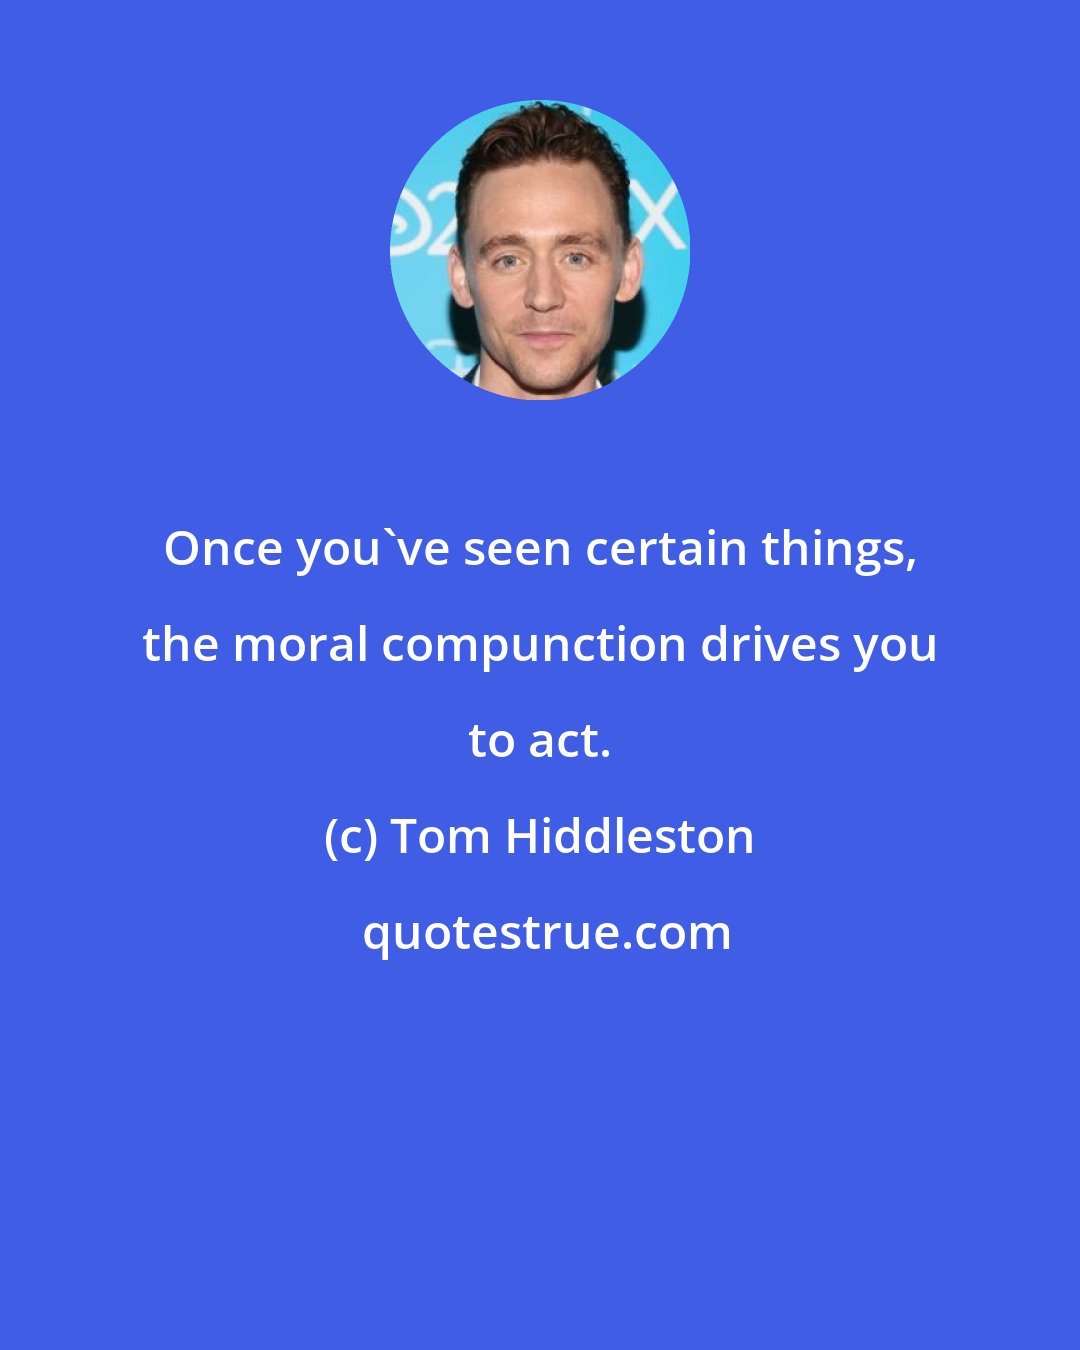 Tom Hiddleston: Once you've seen certain things, the moral compunction drives you to act.